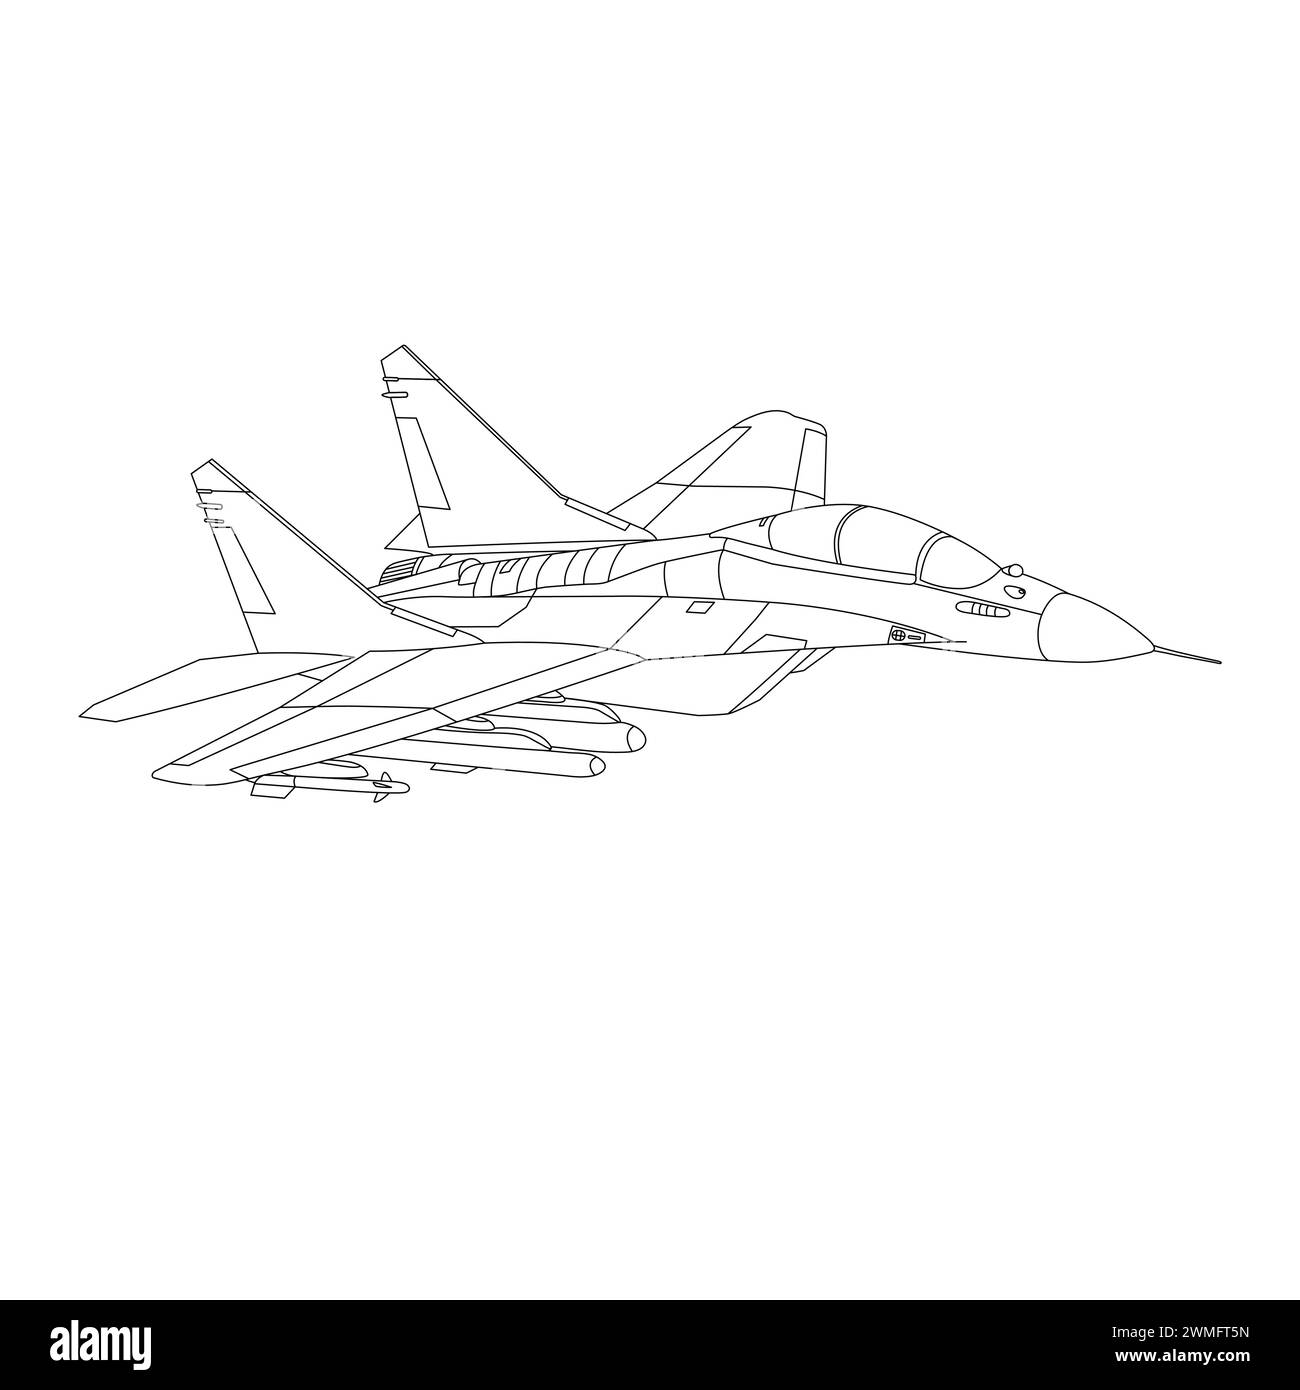 MiG-35 Aircraft Illustration. Fighter Jet MiG35 Fulcrum-F Coloring Book. Russian Military Airplane Isolated on White Background Stock Vector